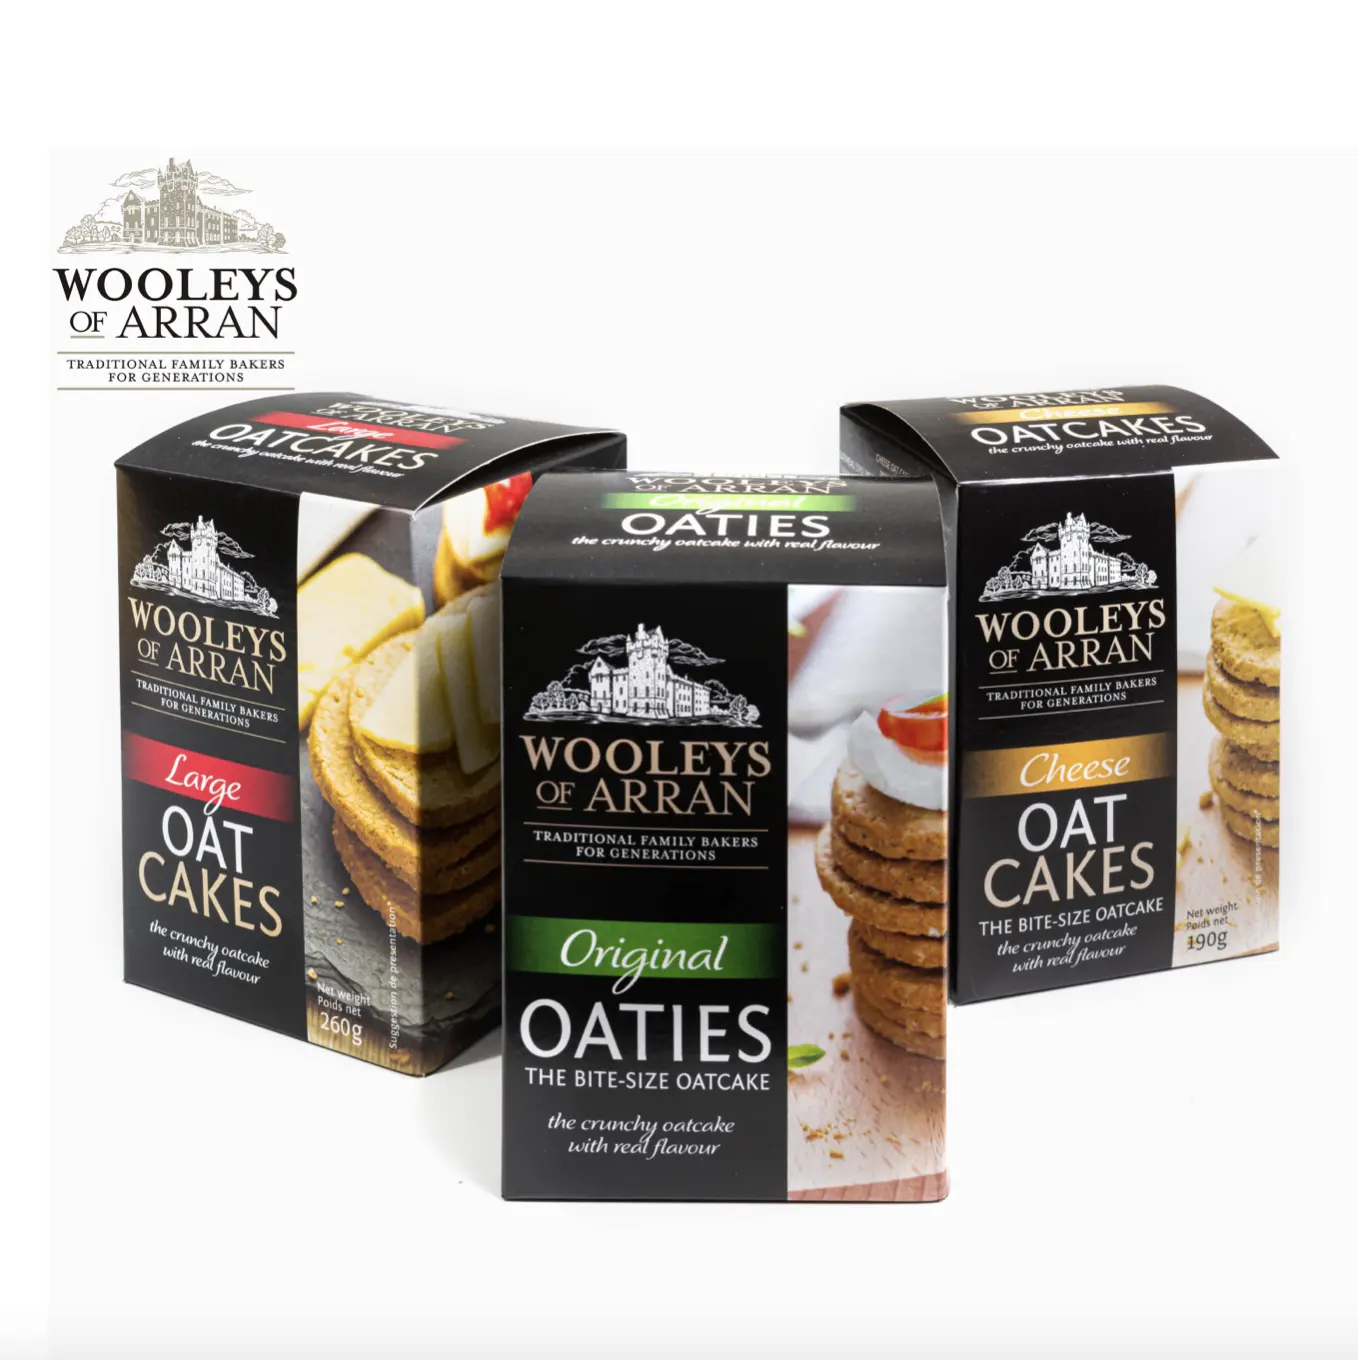 Wooleys Oaties catering pack in cases with 12 cartons x 20 biscuits packs hand crafted for resturaunt UK wholesale grain snacks